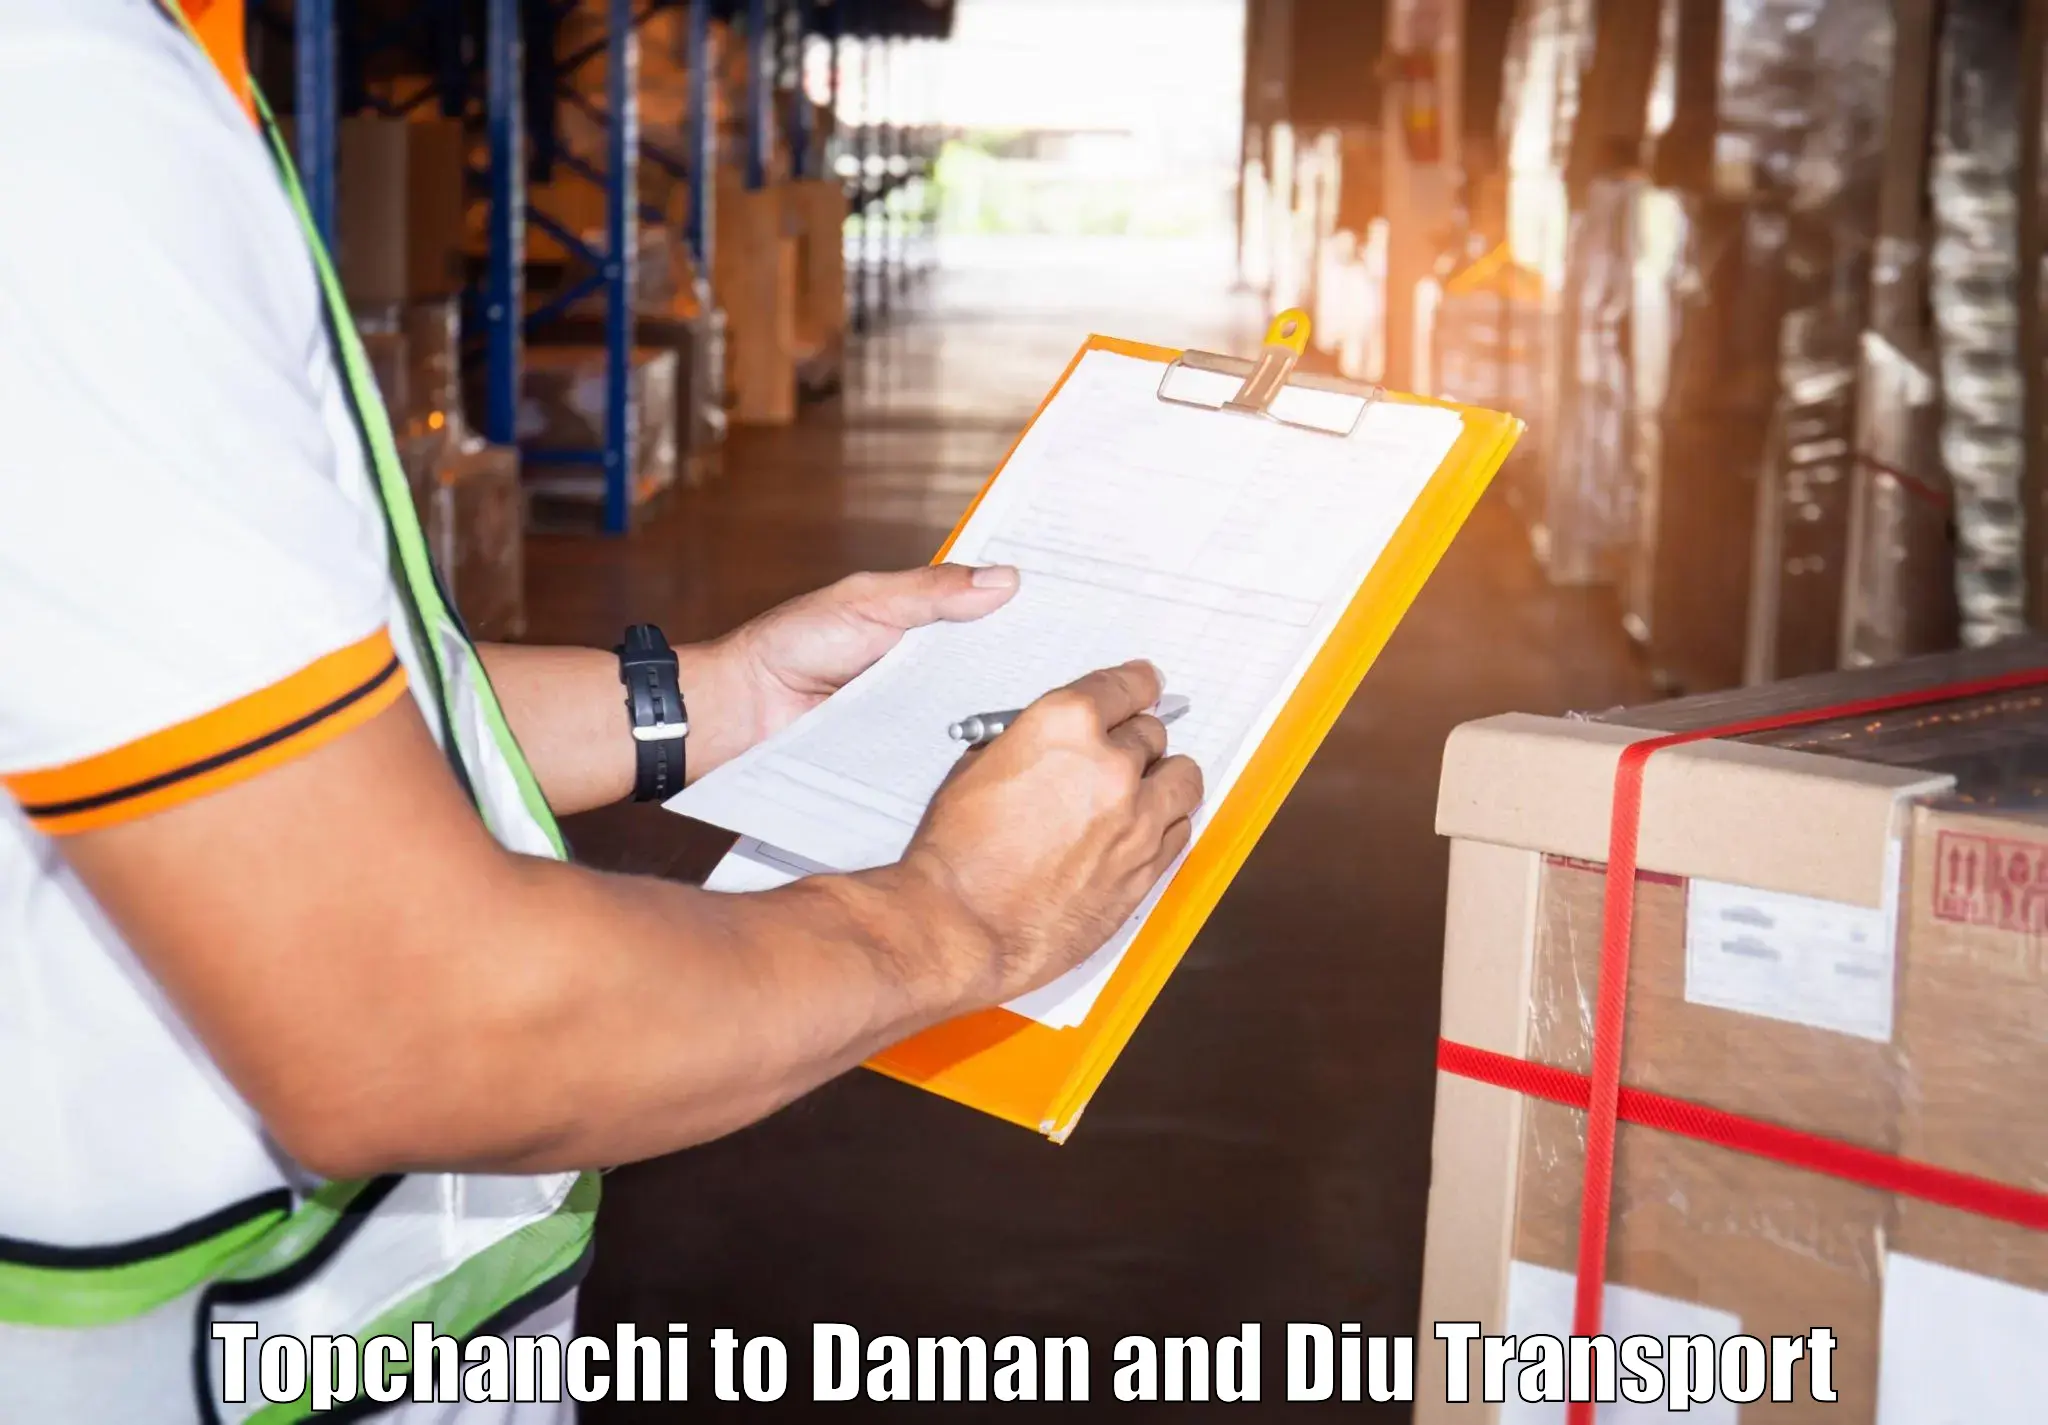 Interstate transport services Topchanchi to Daman and Diu